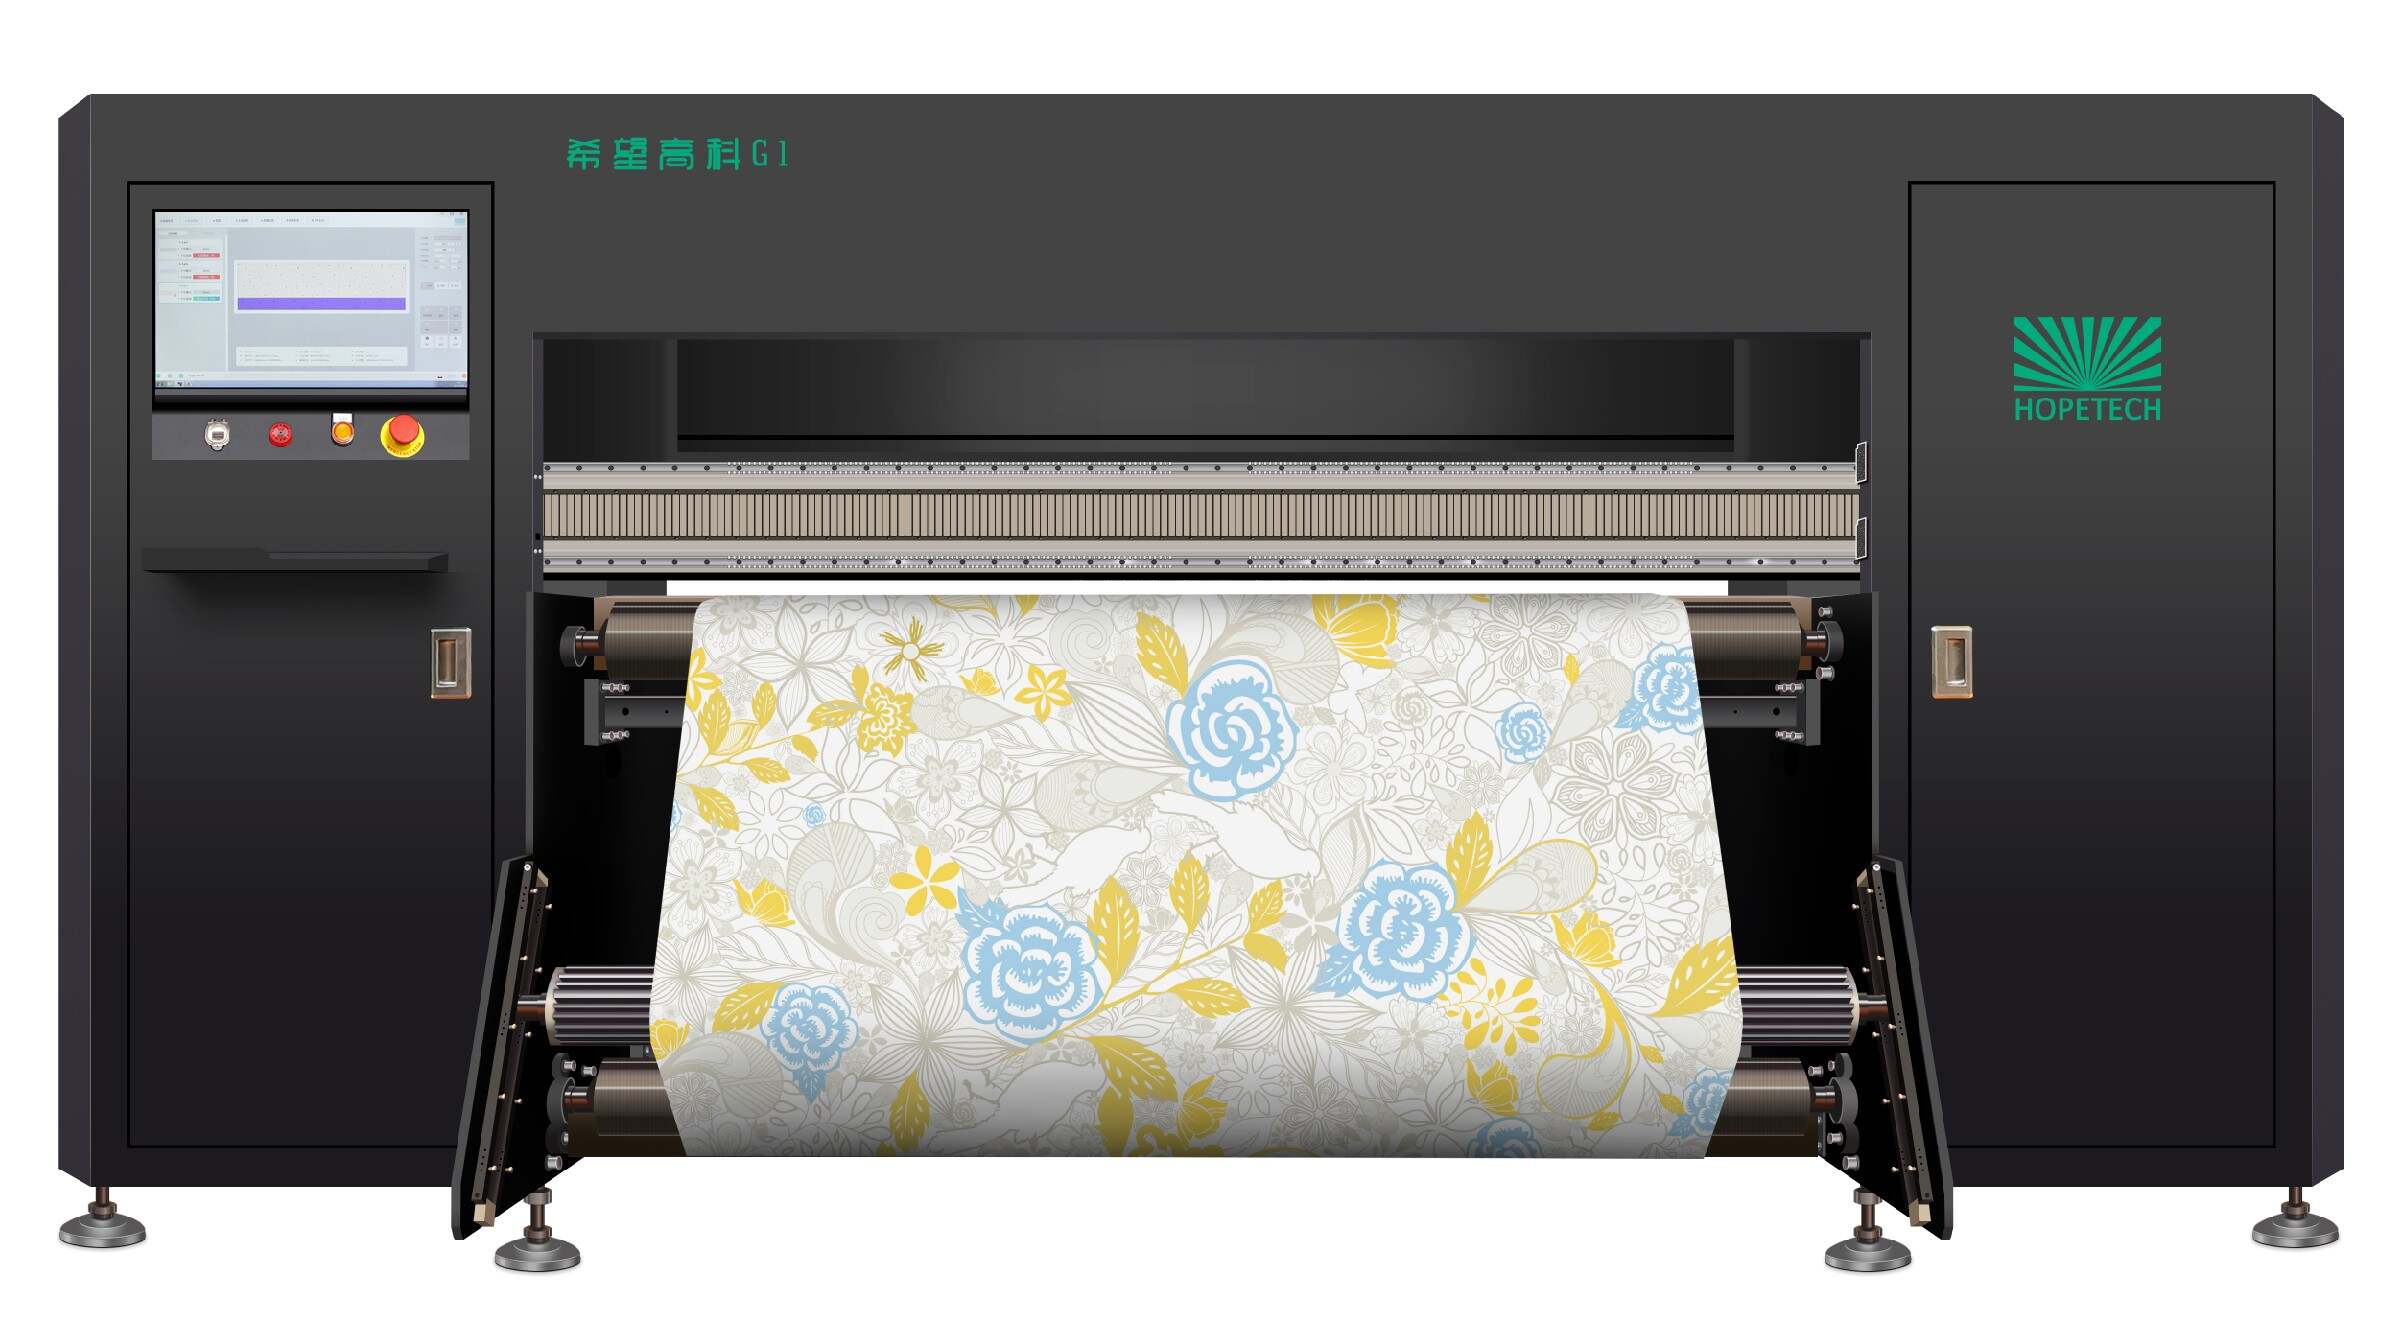 Print Settings for 'Style' sublimation paper - Epson Printer on